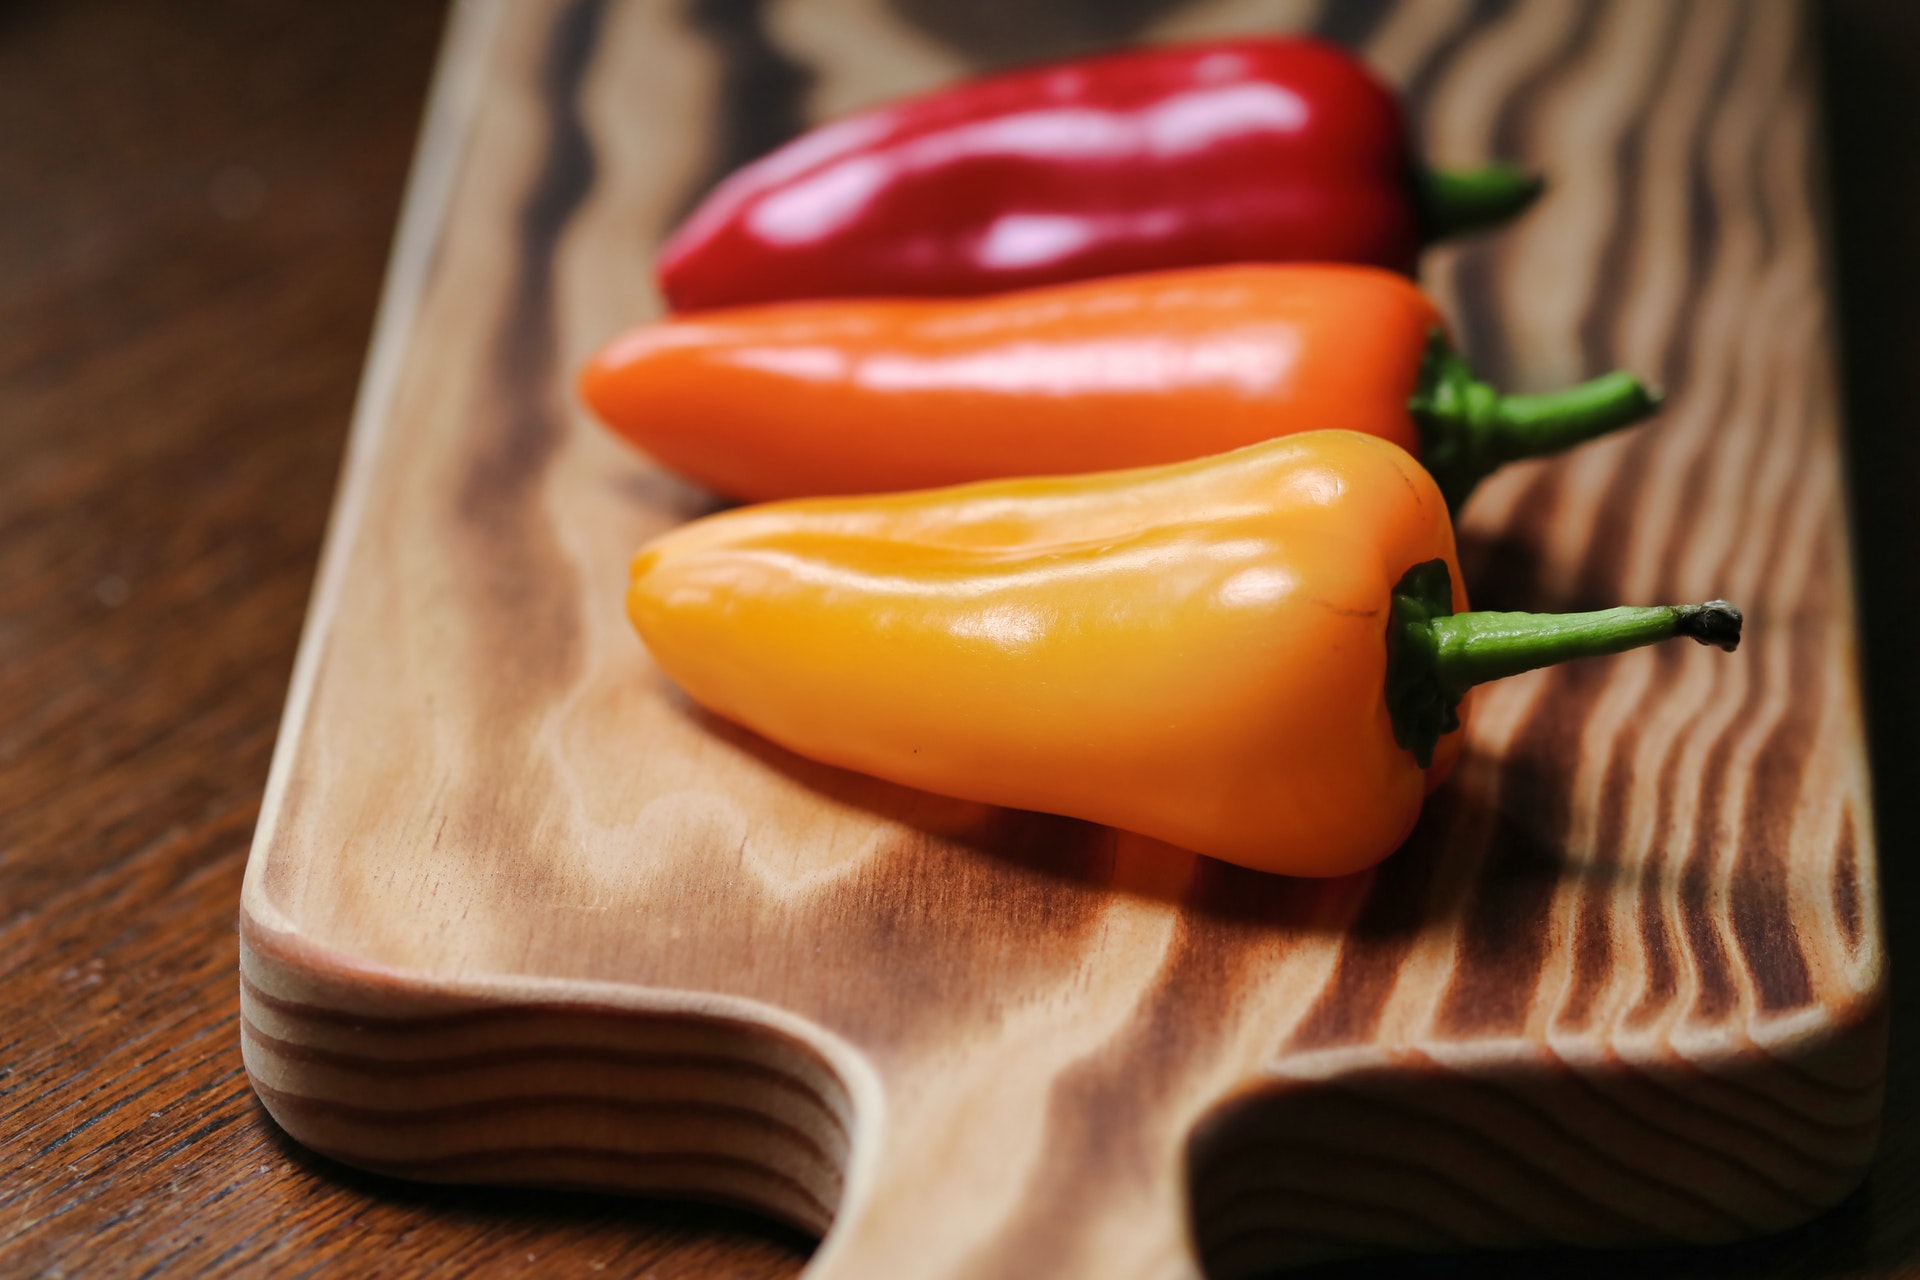 Chili pepper Health Benefits can Help to Live Longer